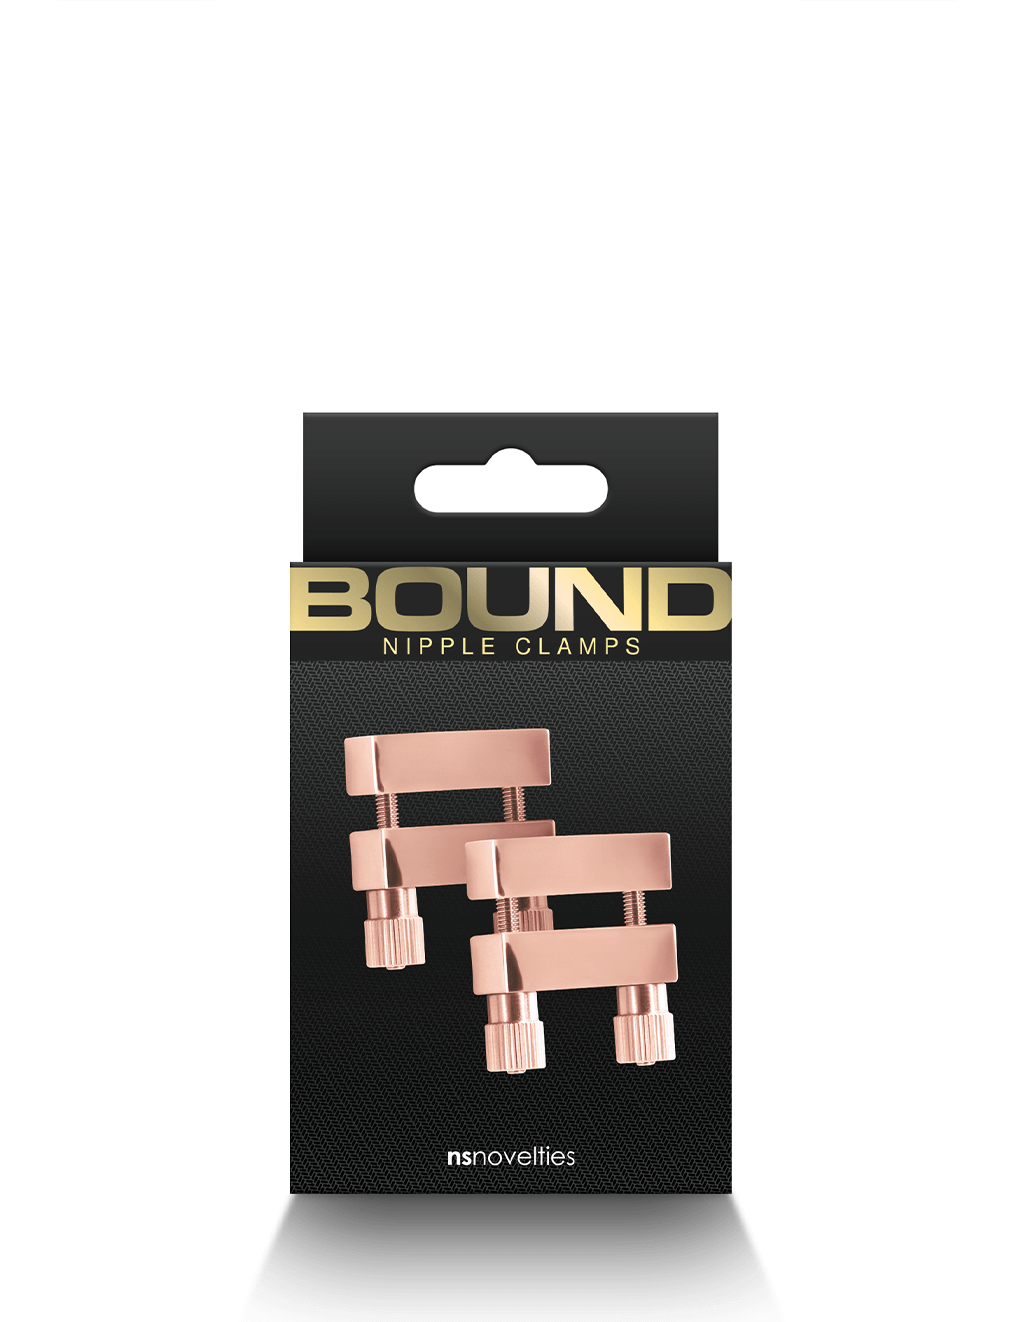 Adjustable Vice Clamps V1 - Rose Gold Package